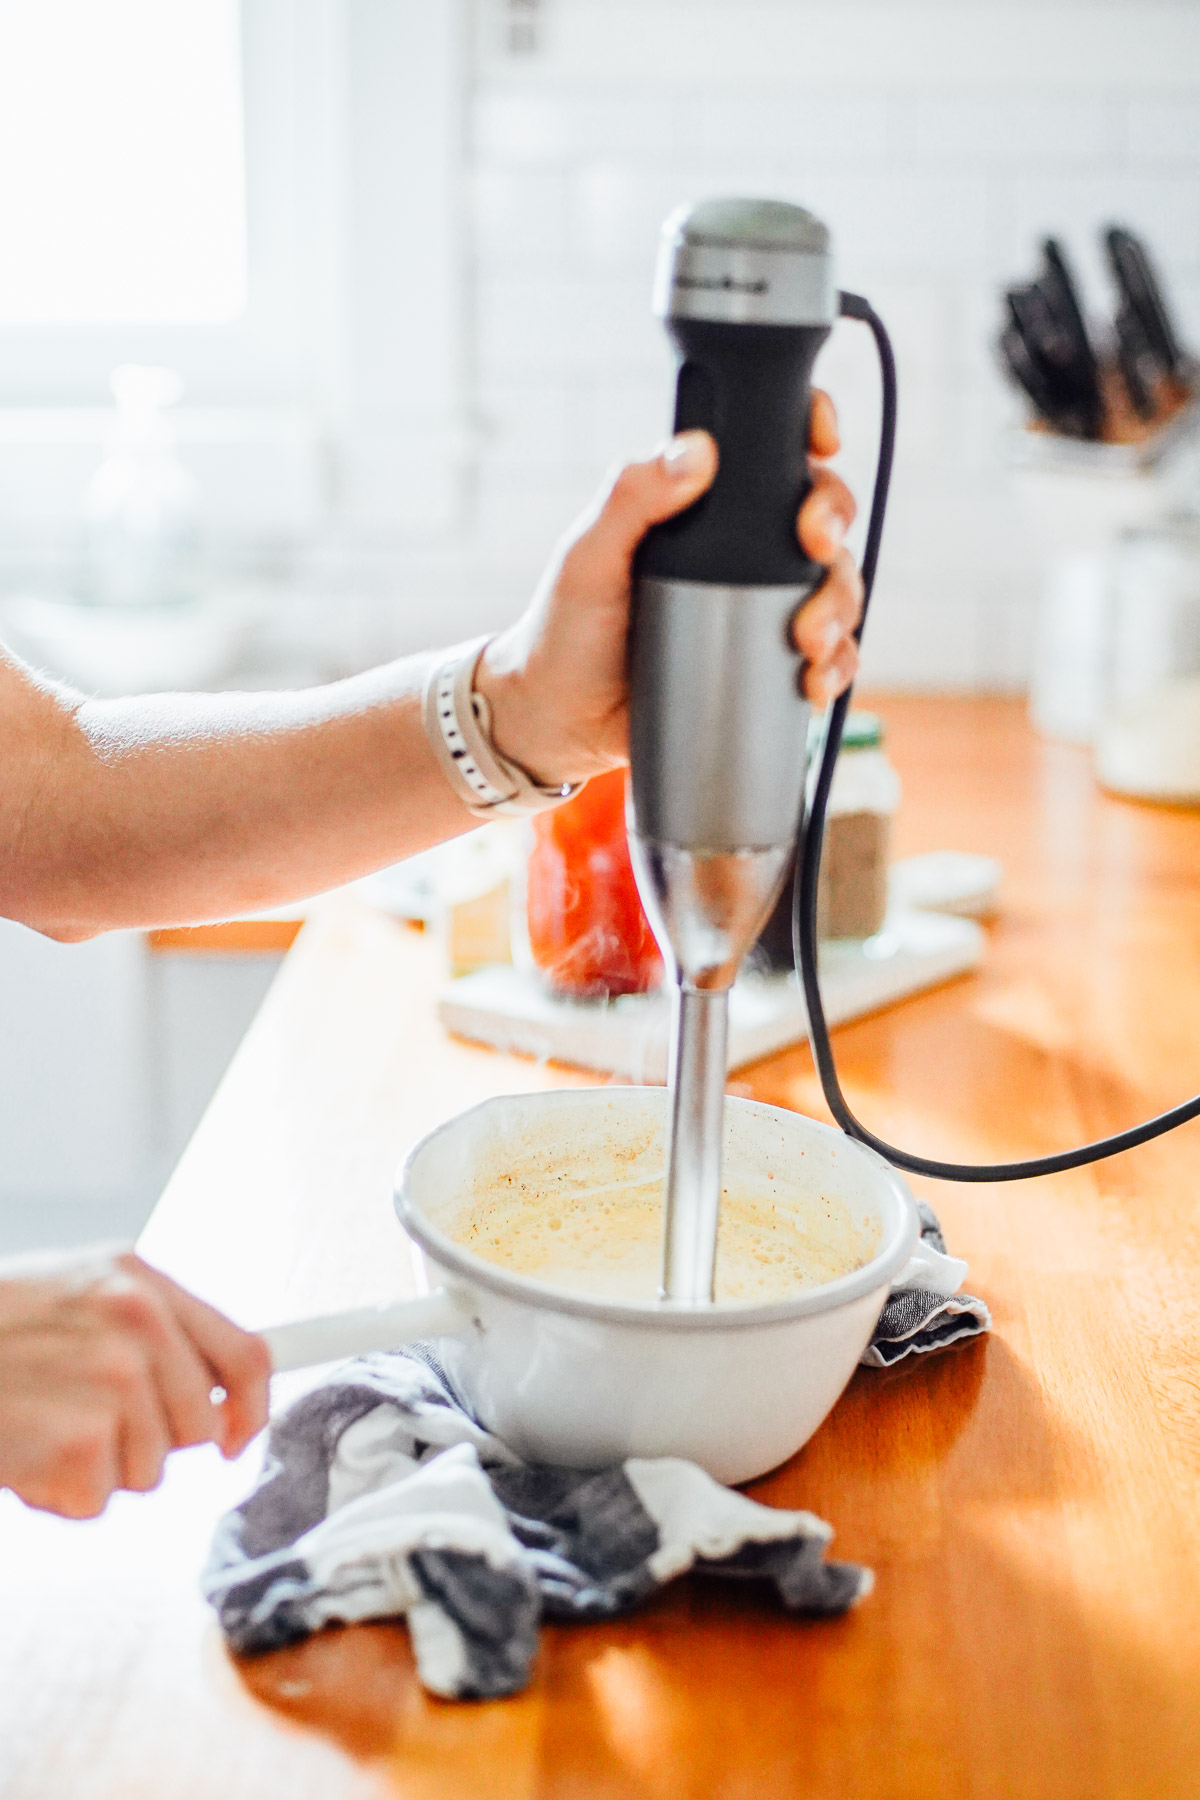 Using an immersion blender to froth milk in a white ceramic pot.